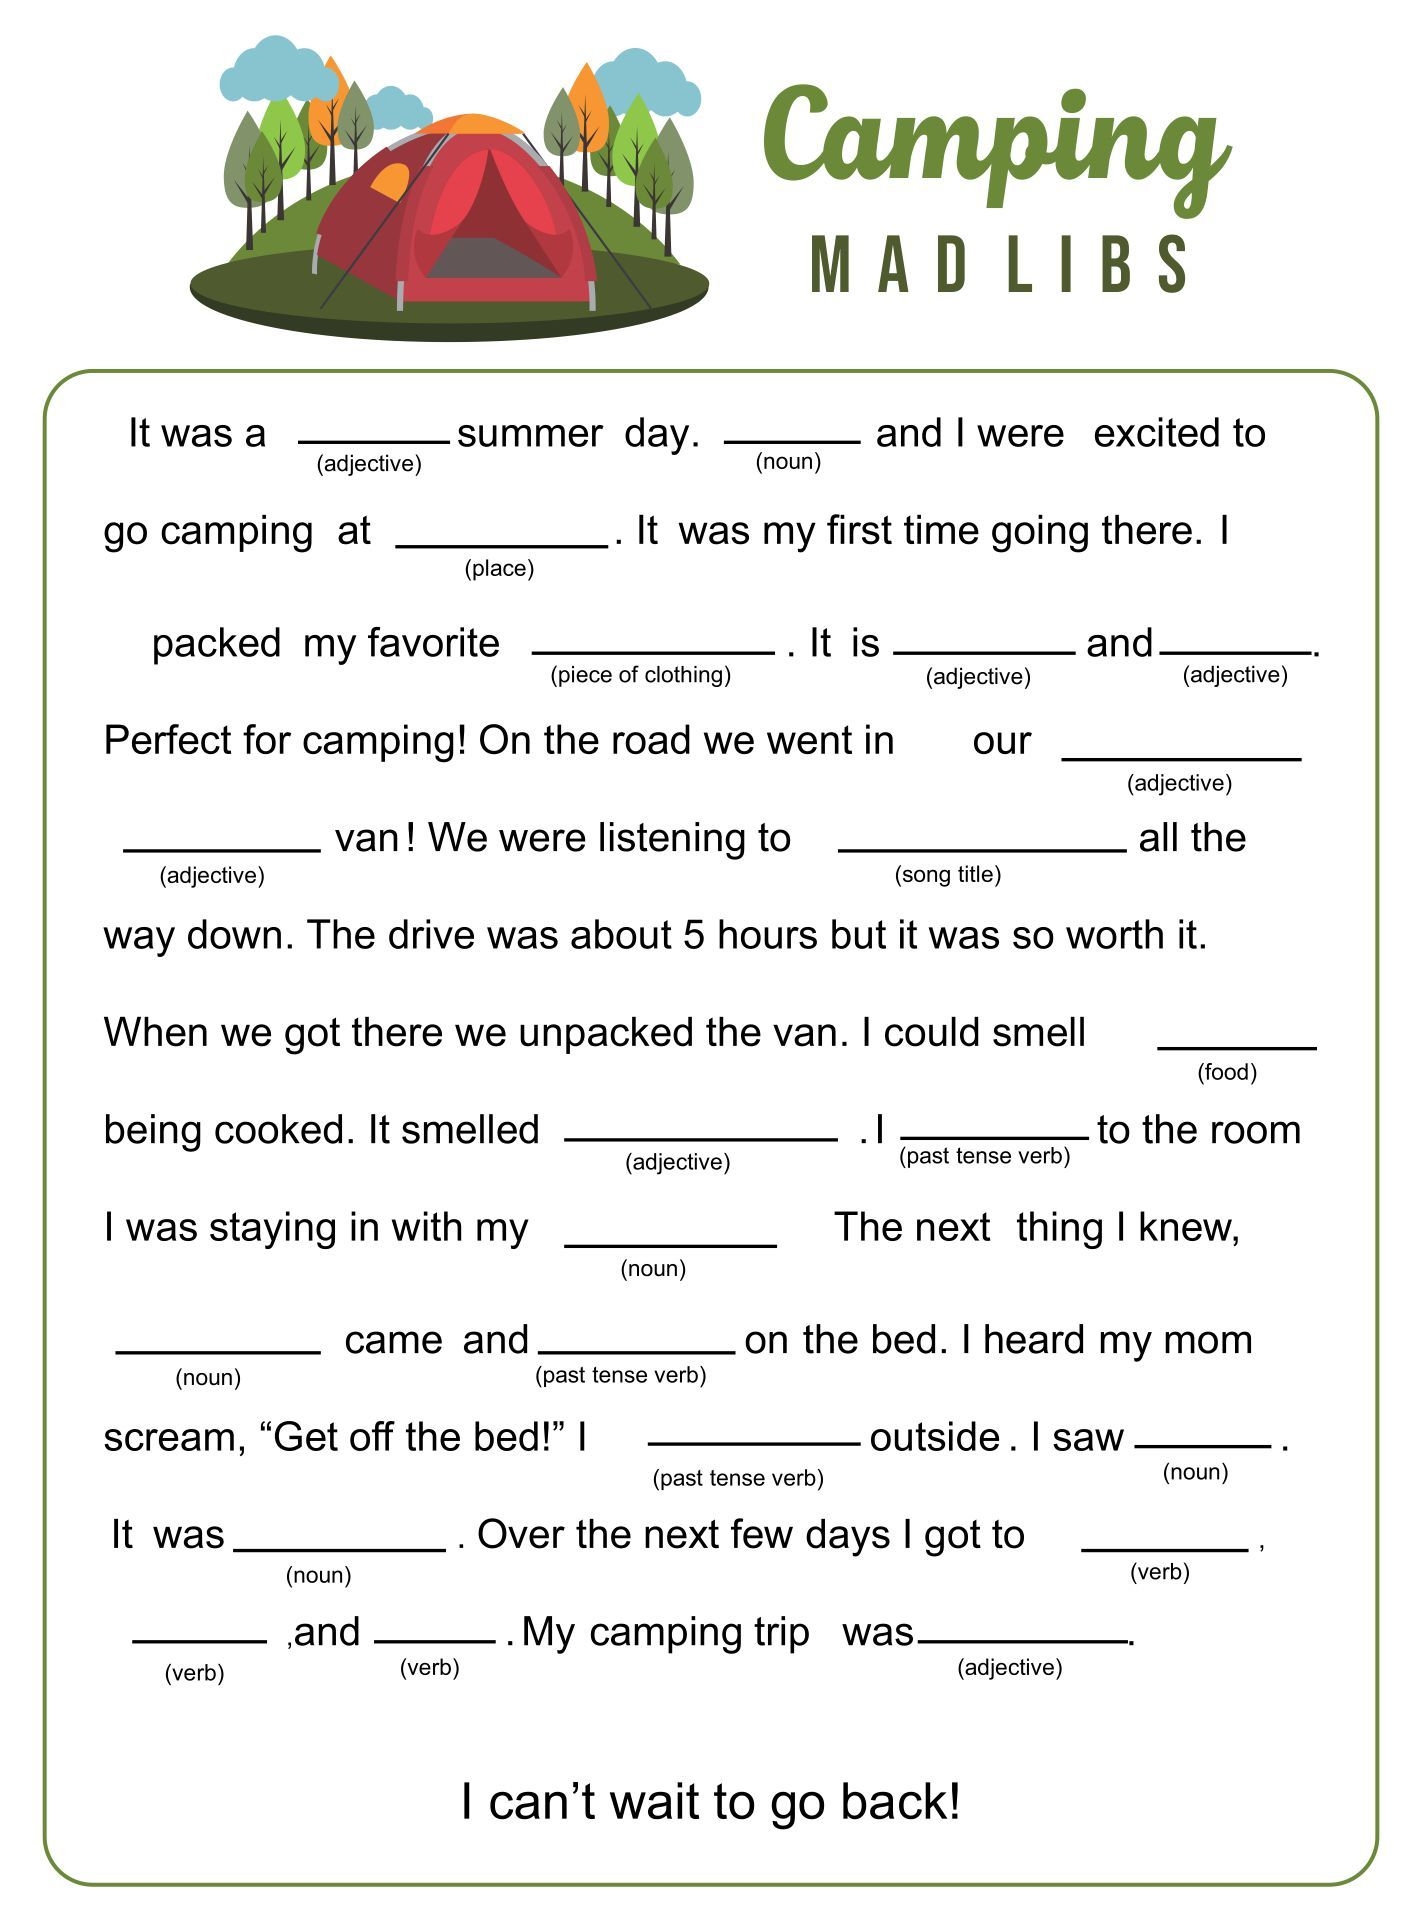 20 Best Camping Mad Libs Printable PDF For Free At Printablee Camping Classroom Camping Theme Classroom Camping